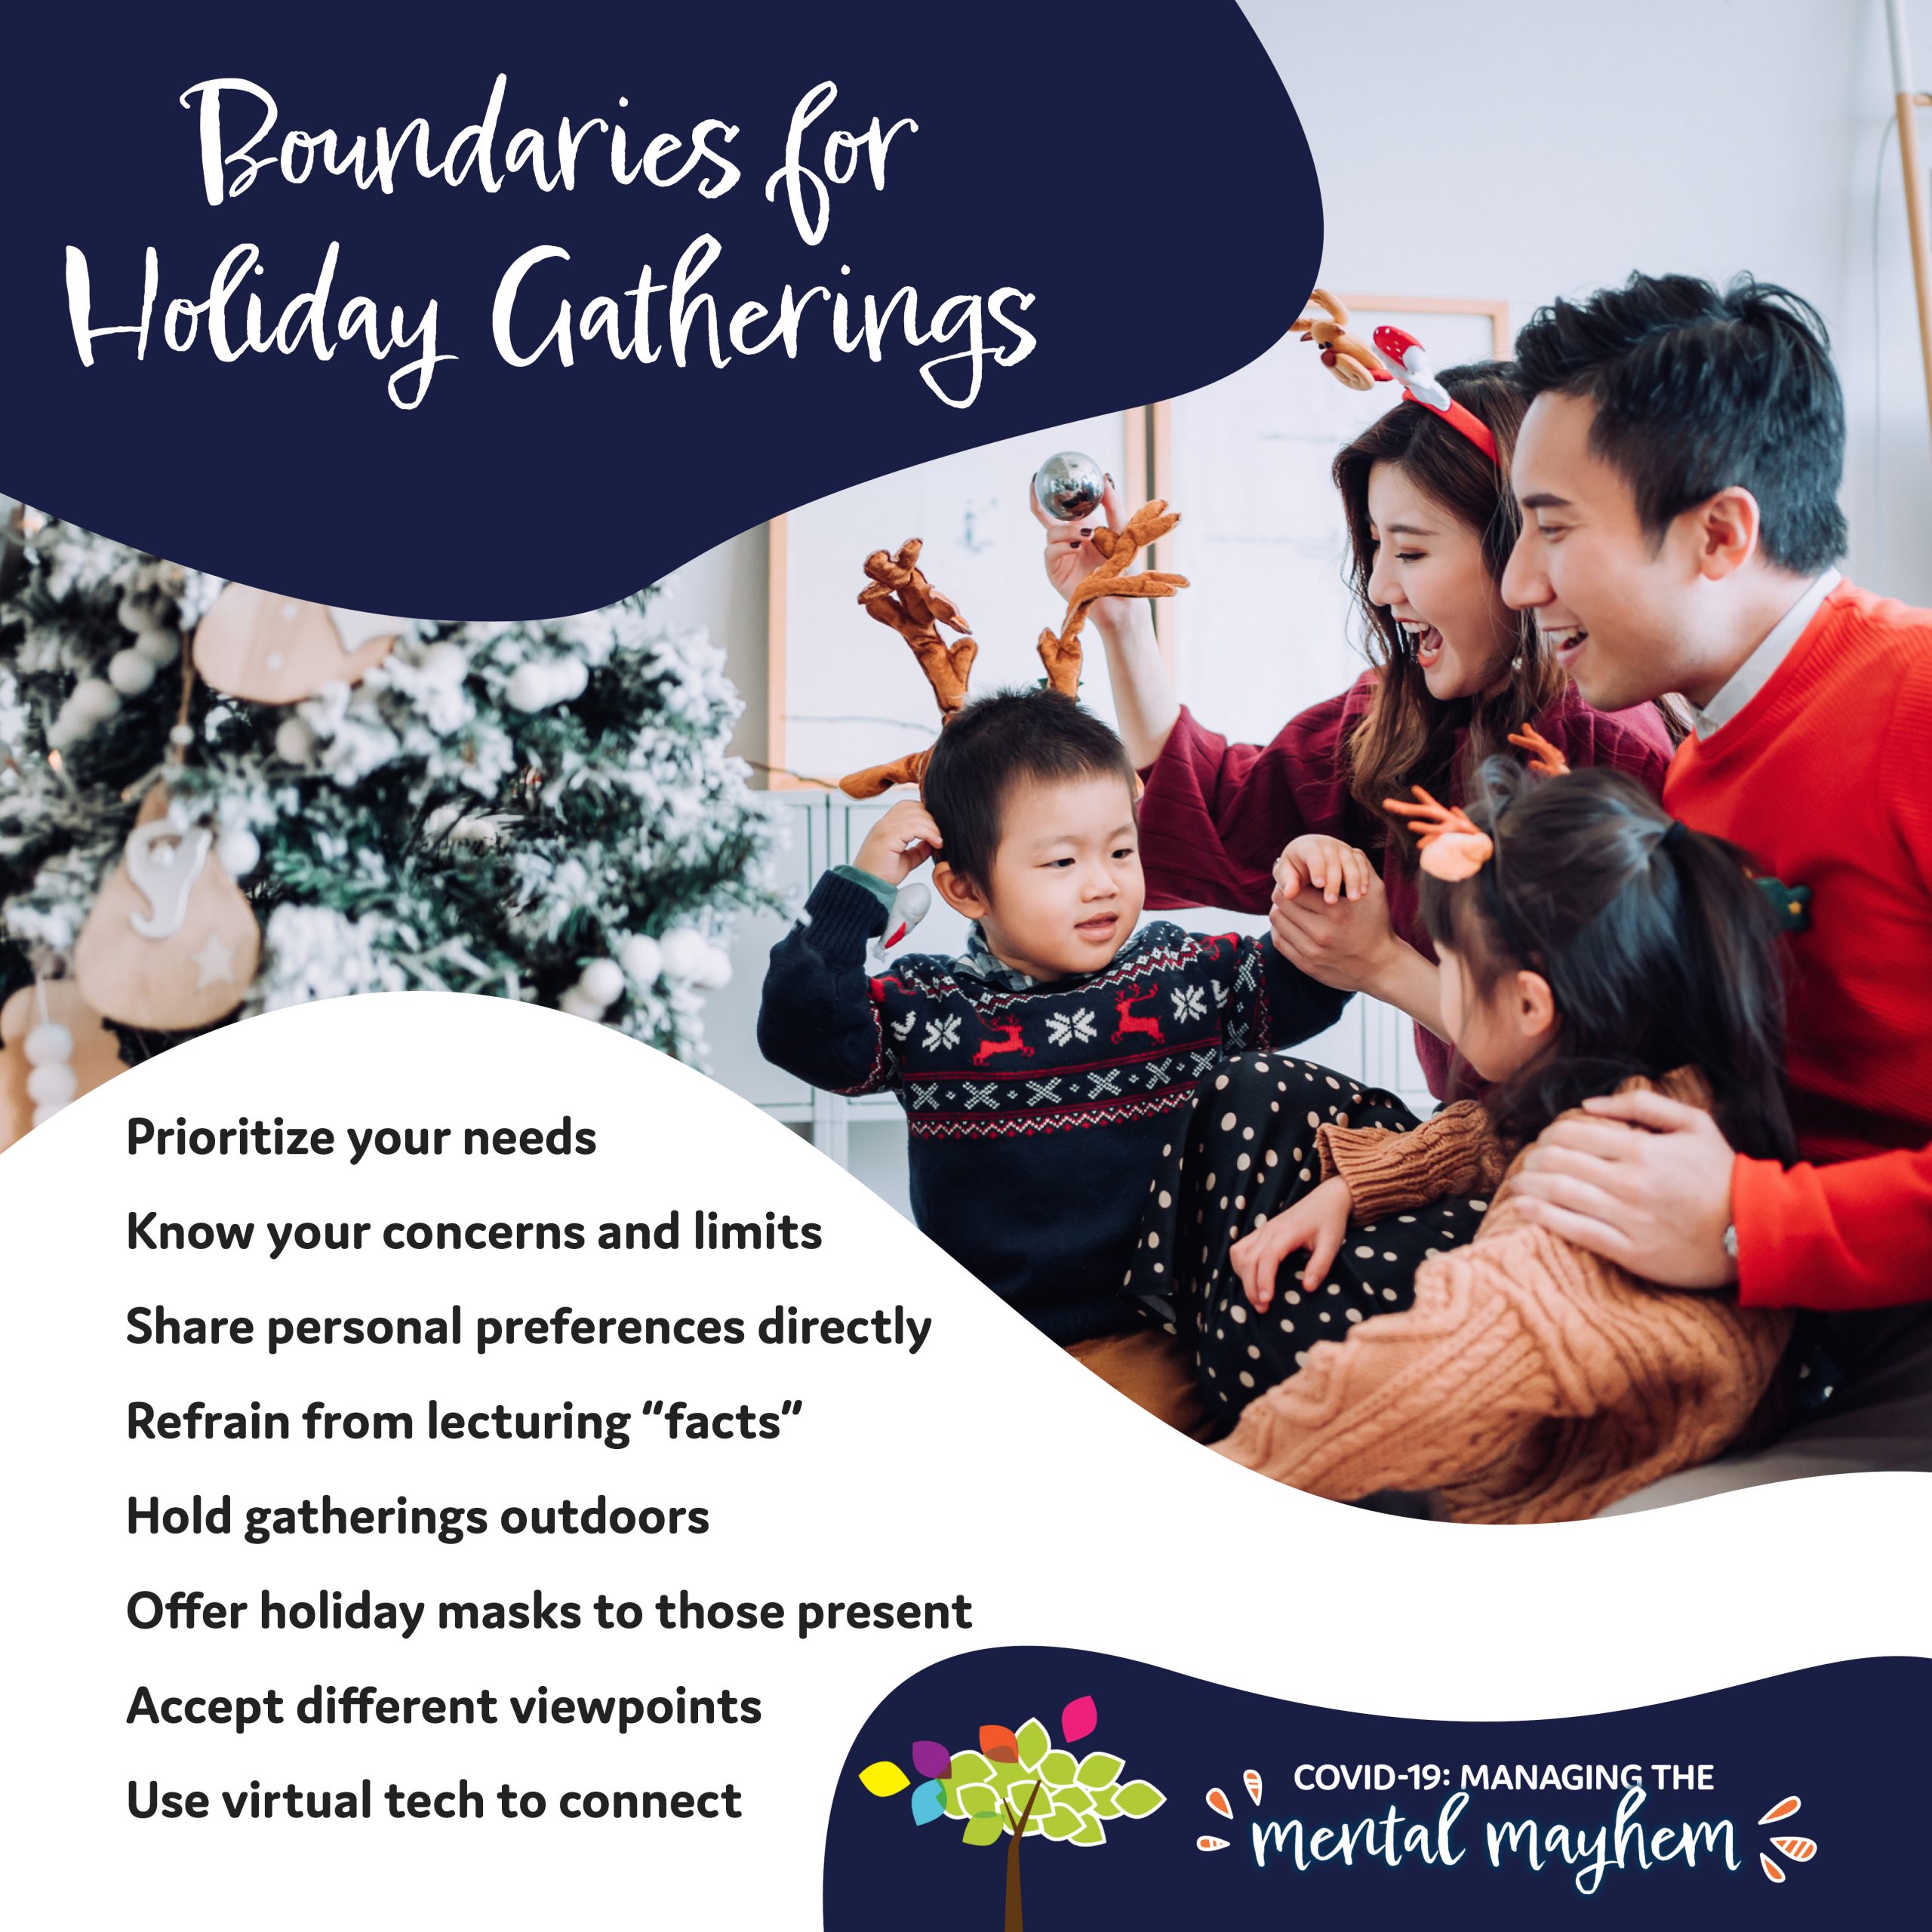 COVID-19 Mental Mayhem Blog: Boundaries for Holiday Gatherings - Asian family: mom and dad help young toddler put reindeer antlers on as daughter sits beside them with a Christmas tree beside them